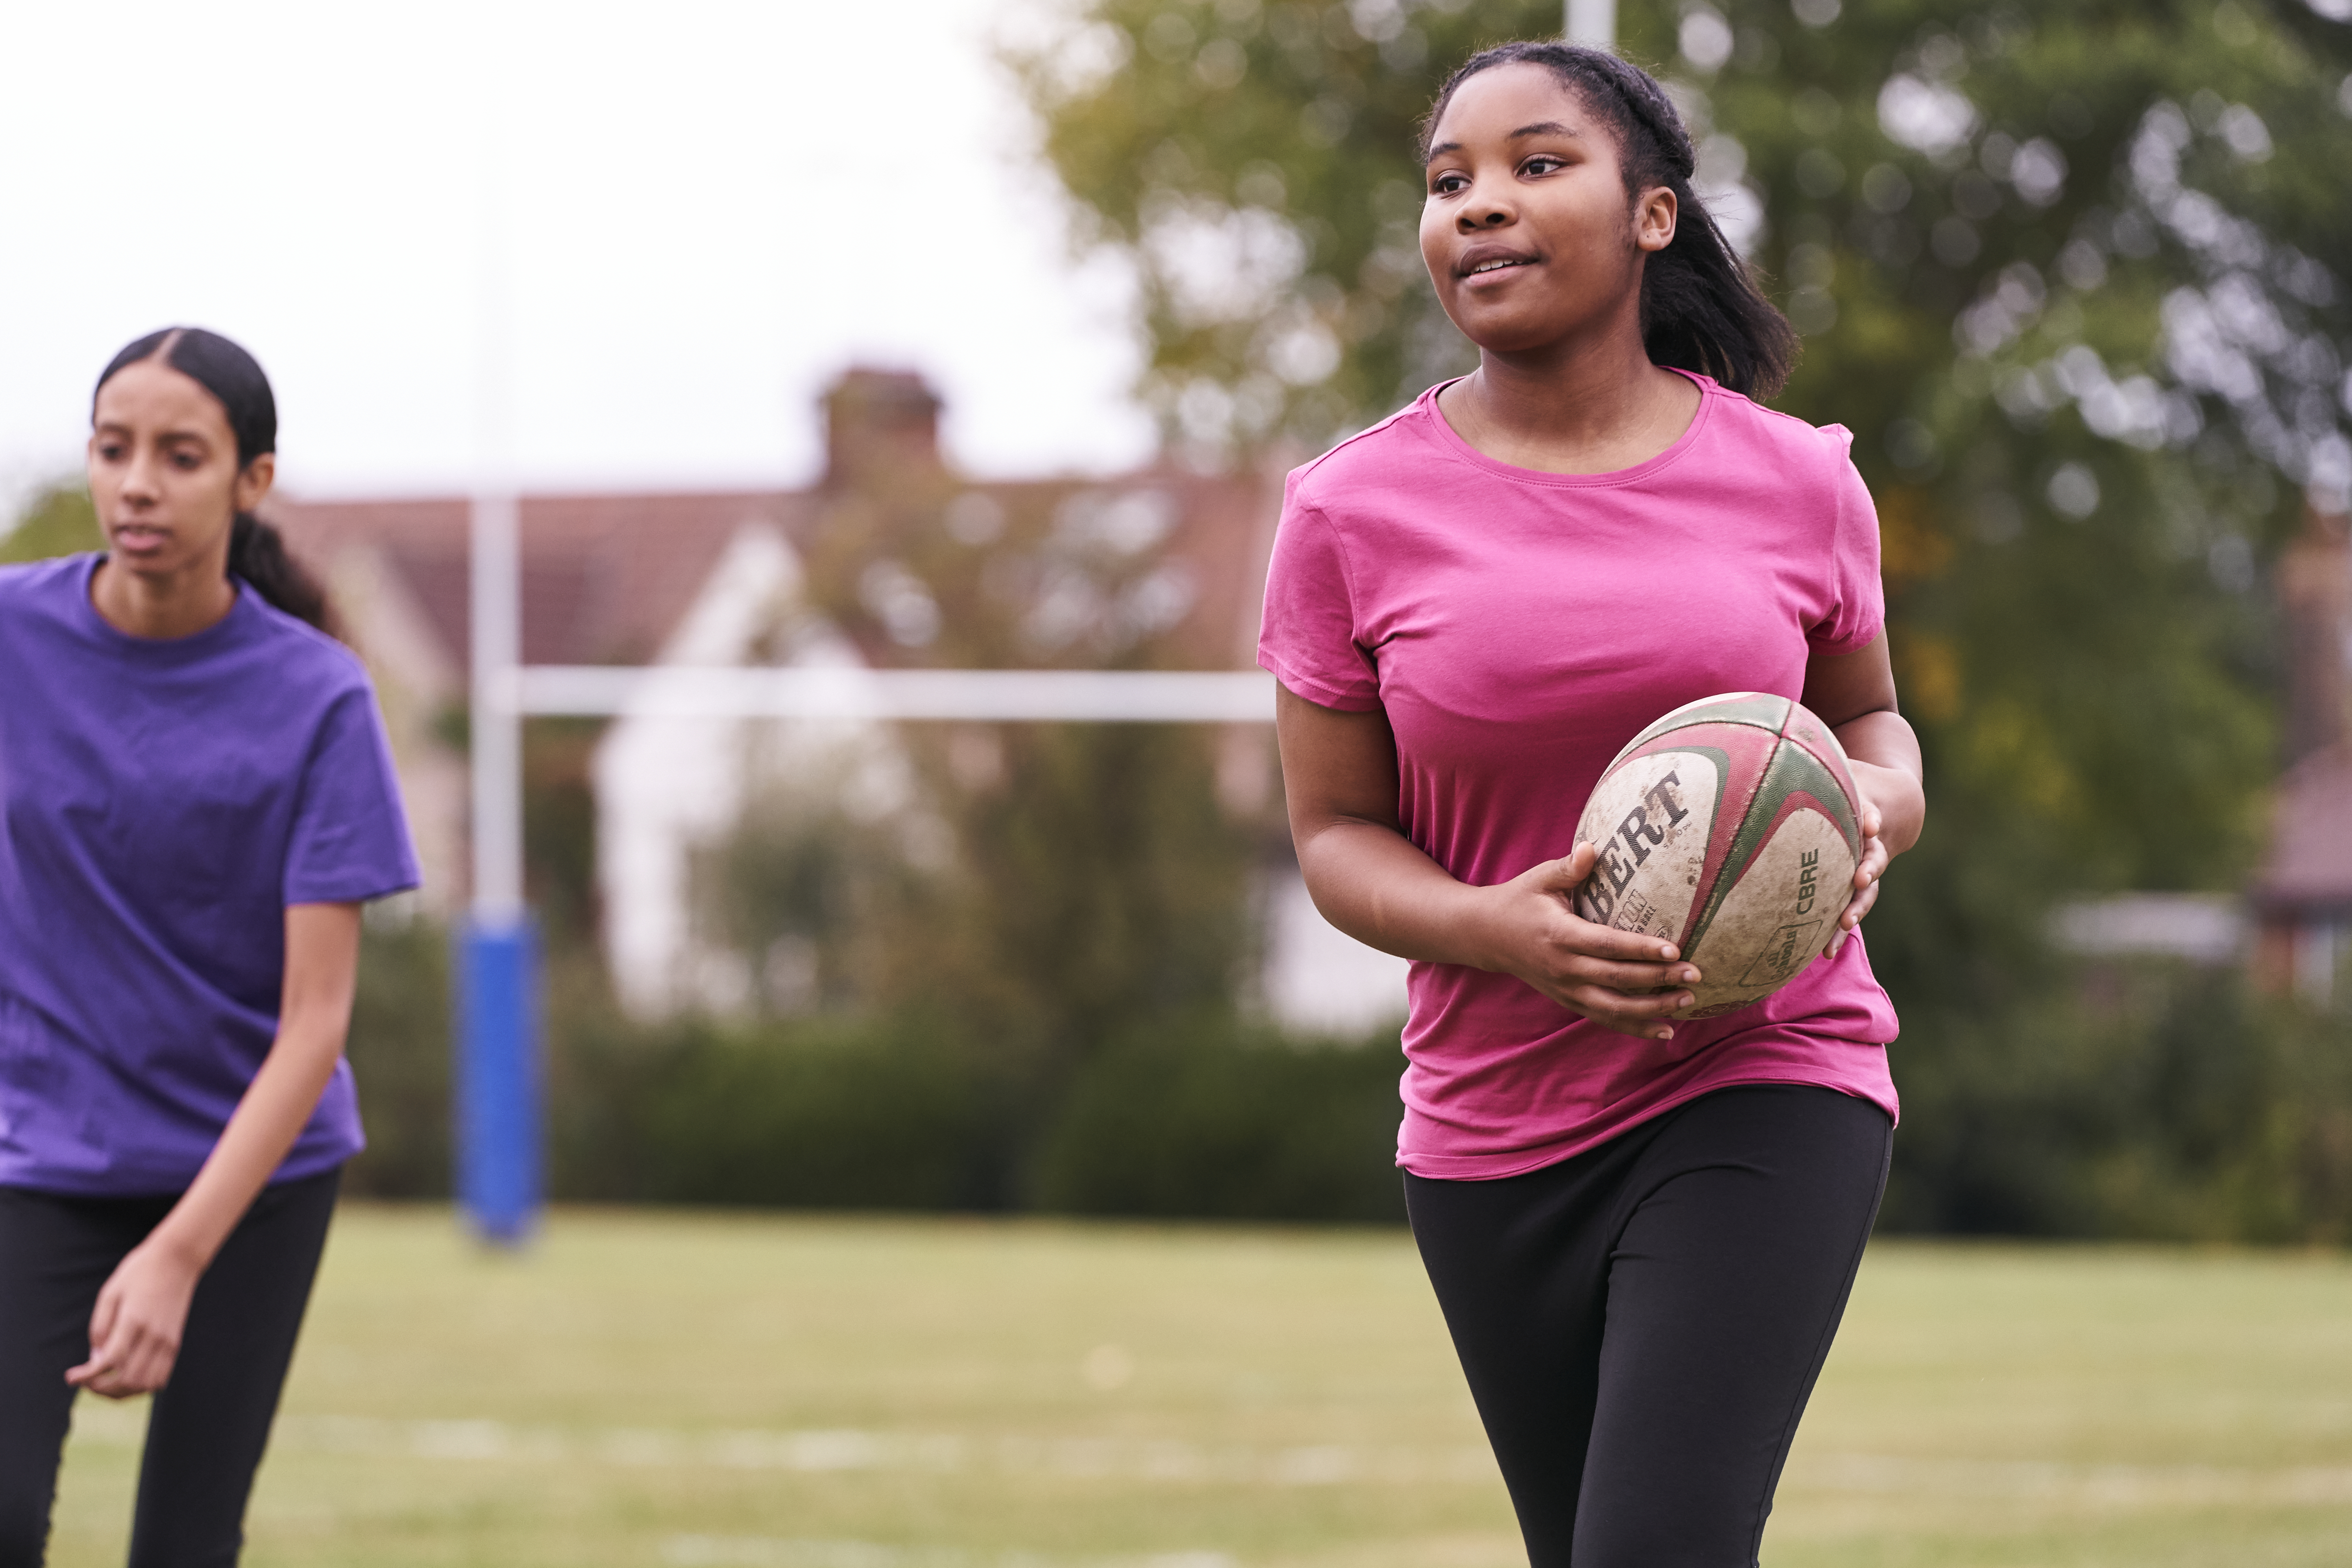 A young girl playing rugby on a field, holding the rugby ball